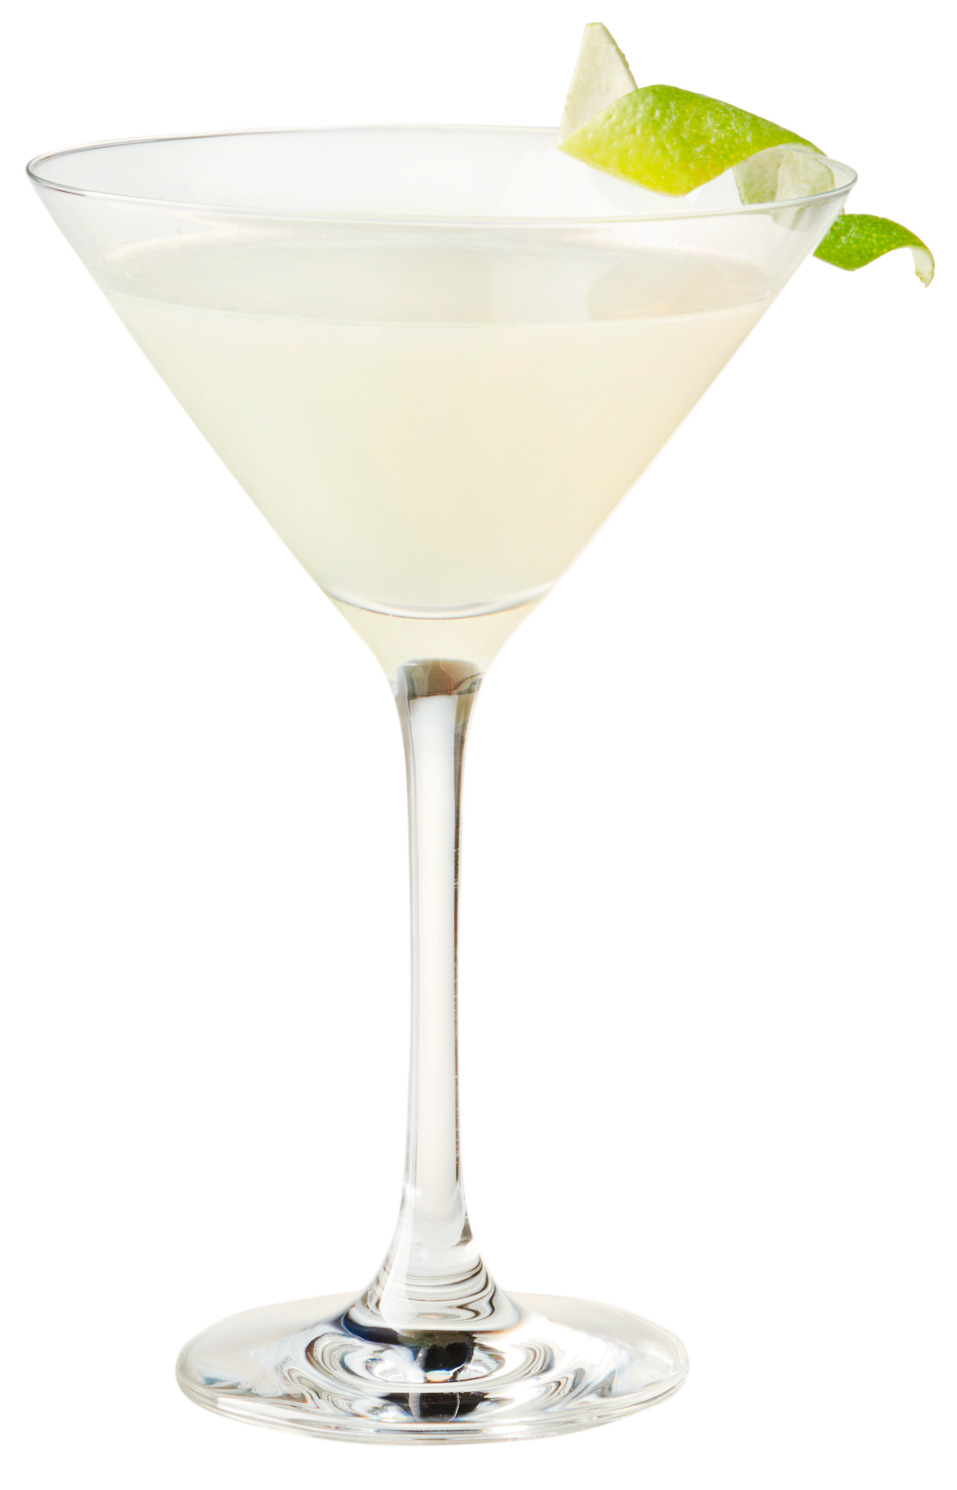 How to Make the Gimlet